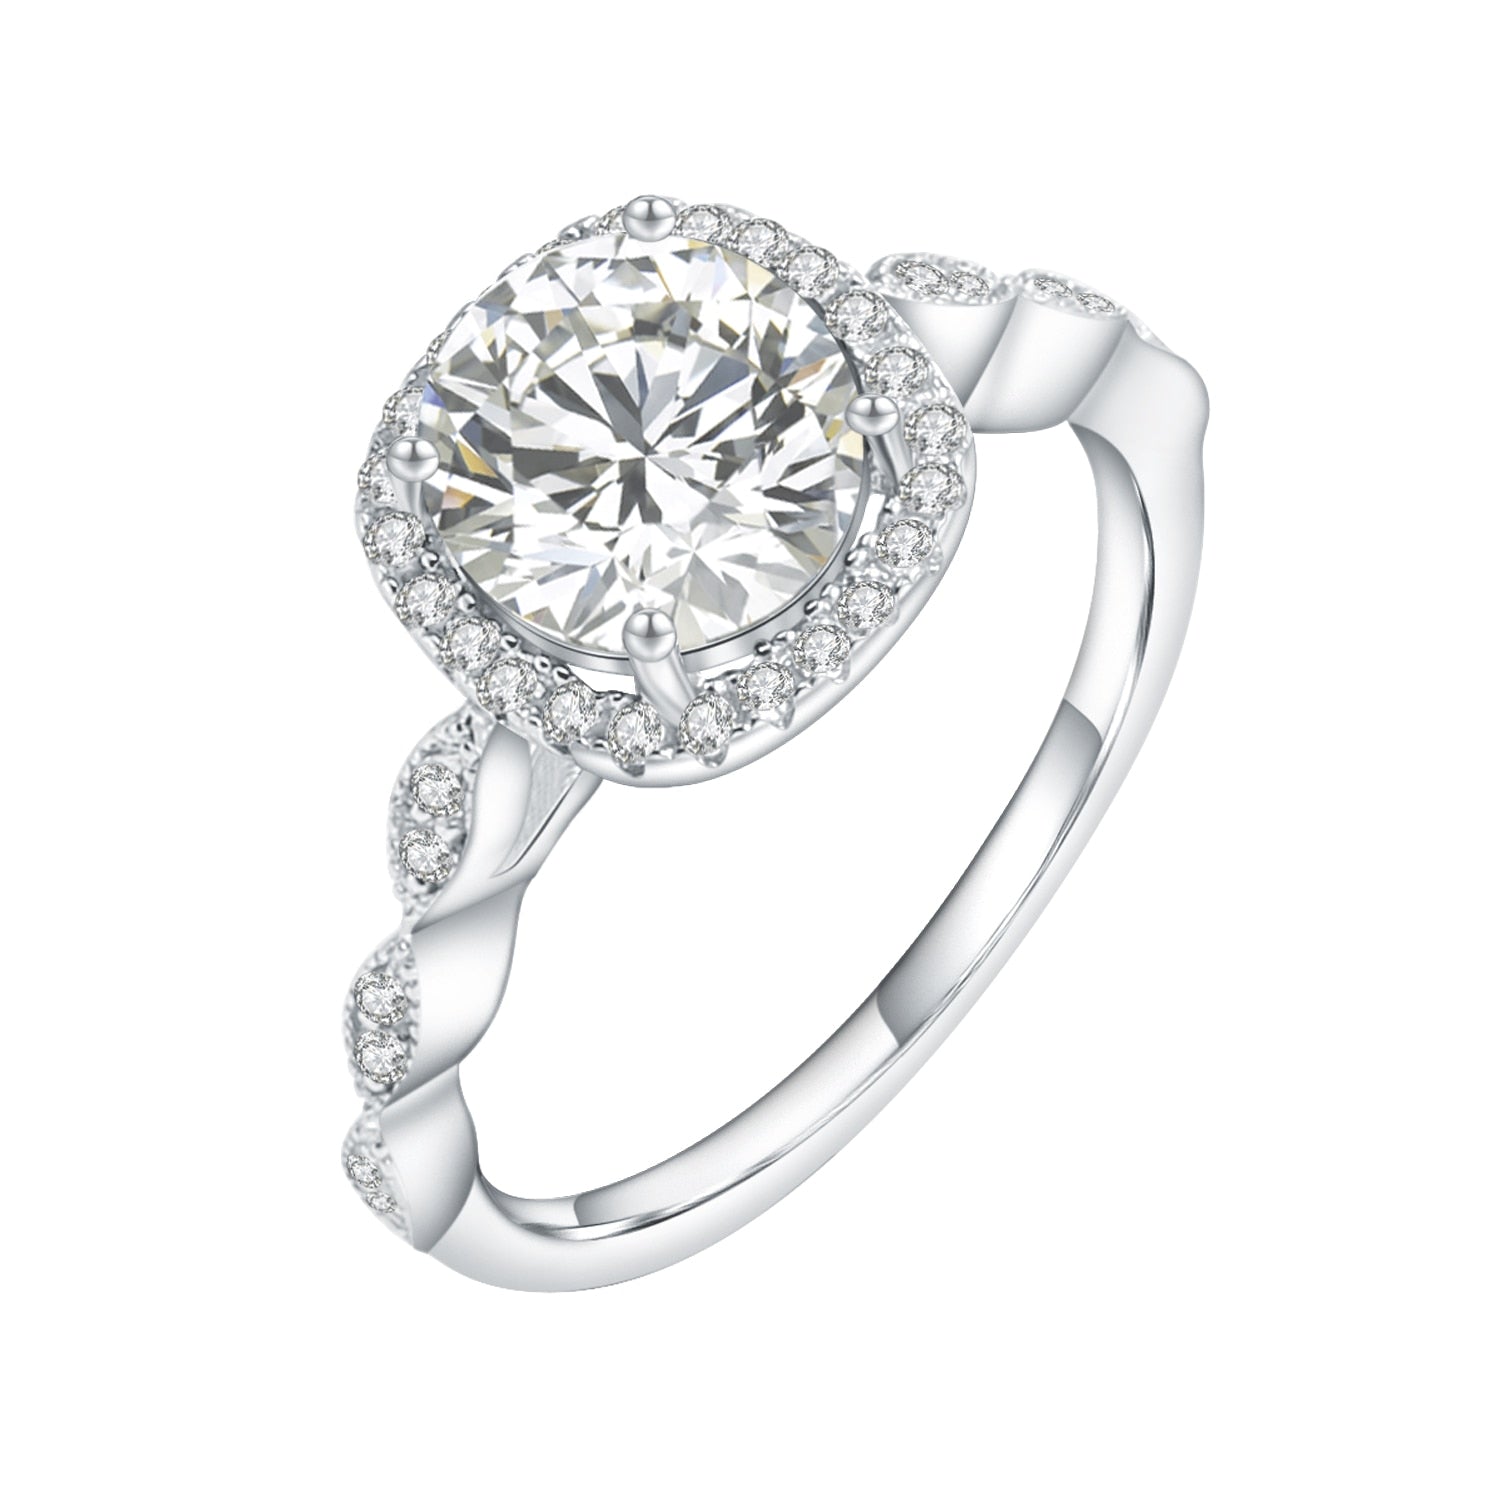 A silver squared halo ring set with a 2CT round moissanite on a scalloped gem encrusted band.